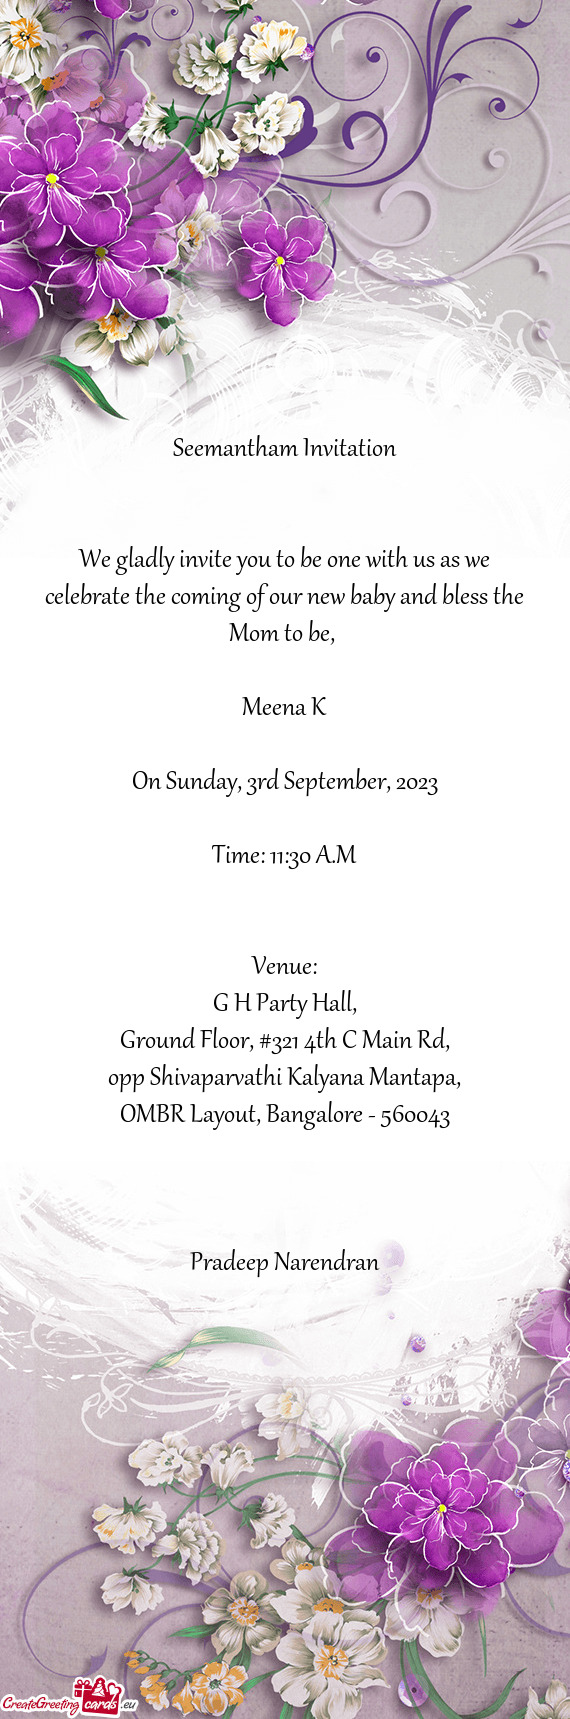 We gladly invite you to be one with us as we celebrate the coming of our new baby and bless the Mom